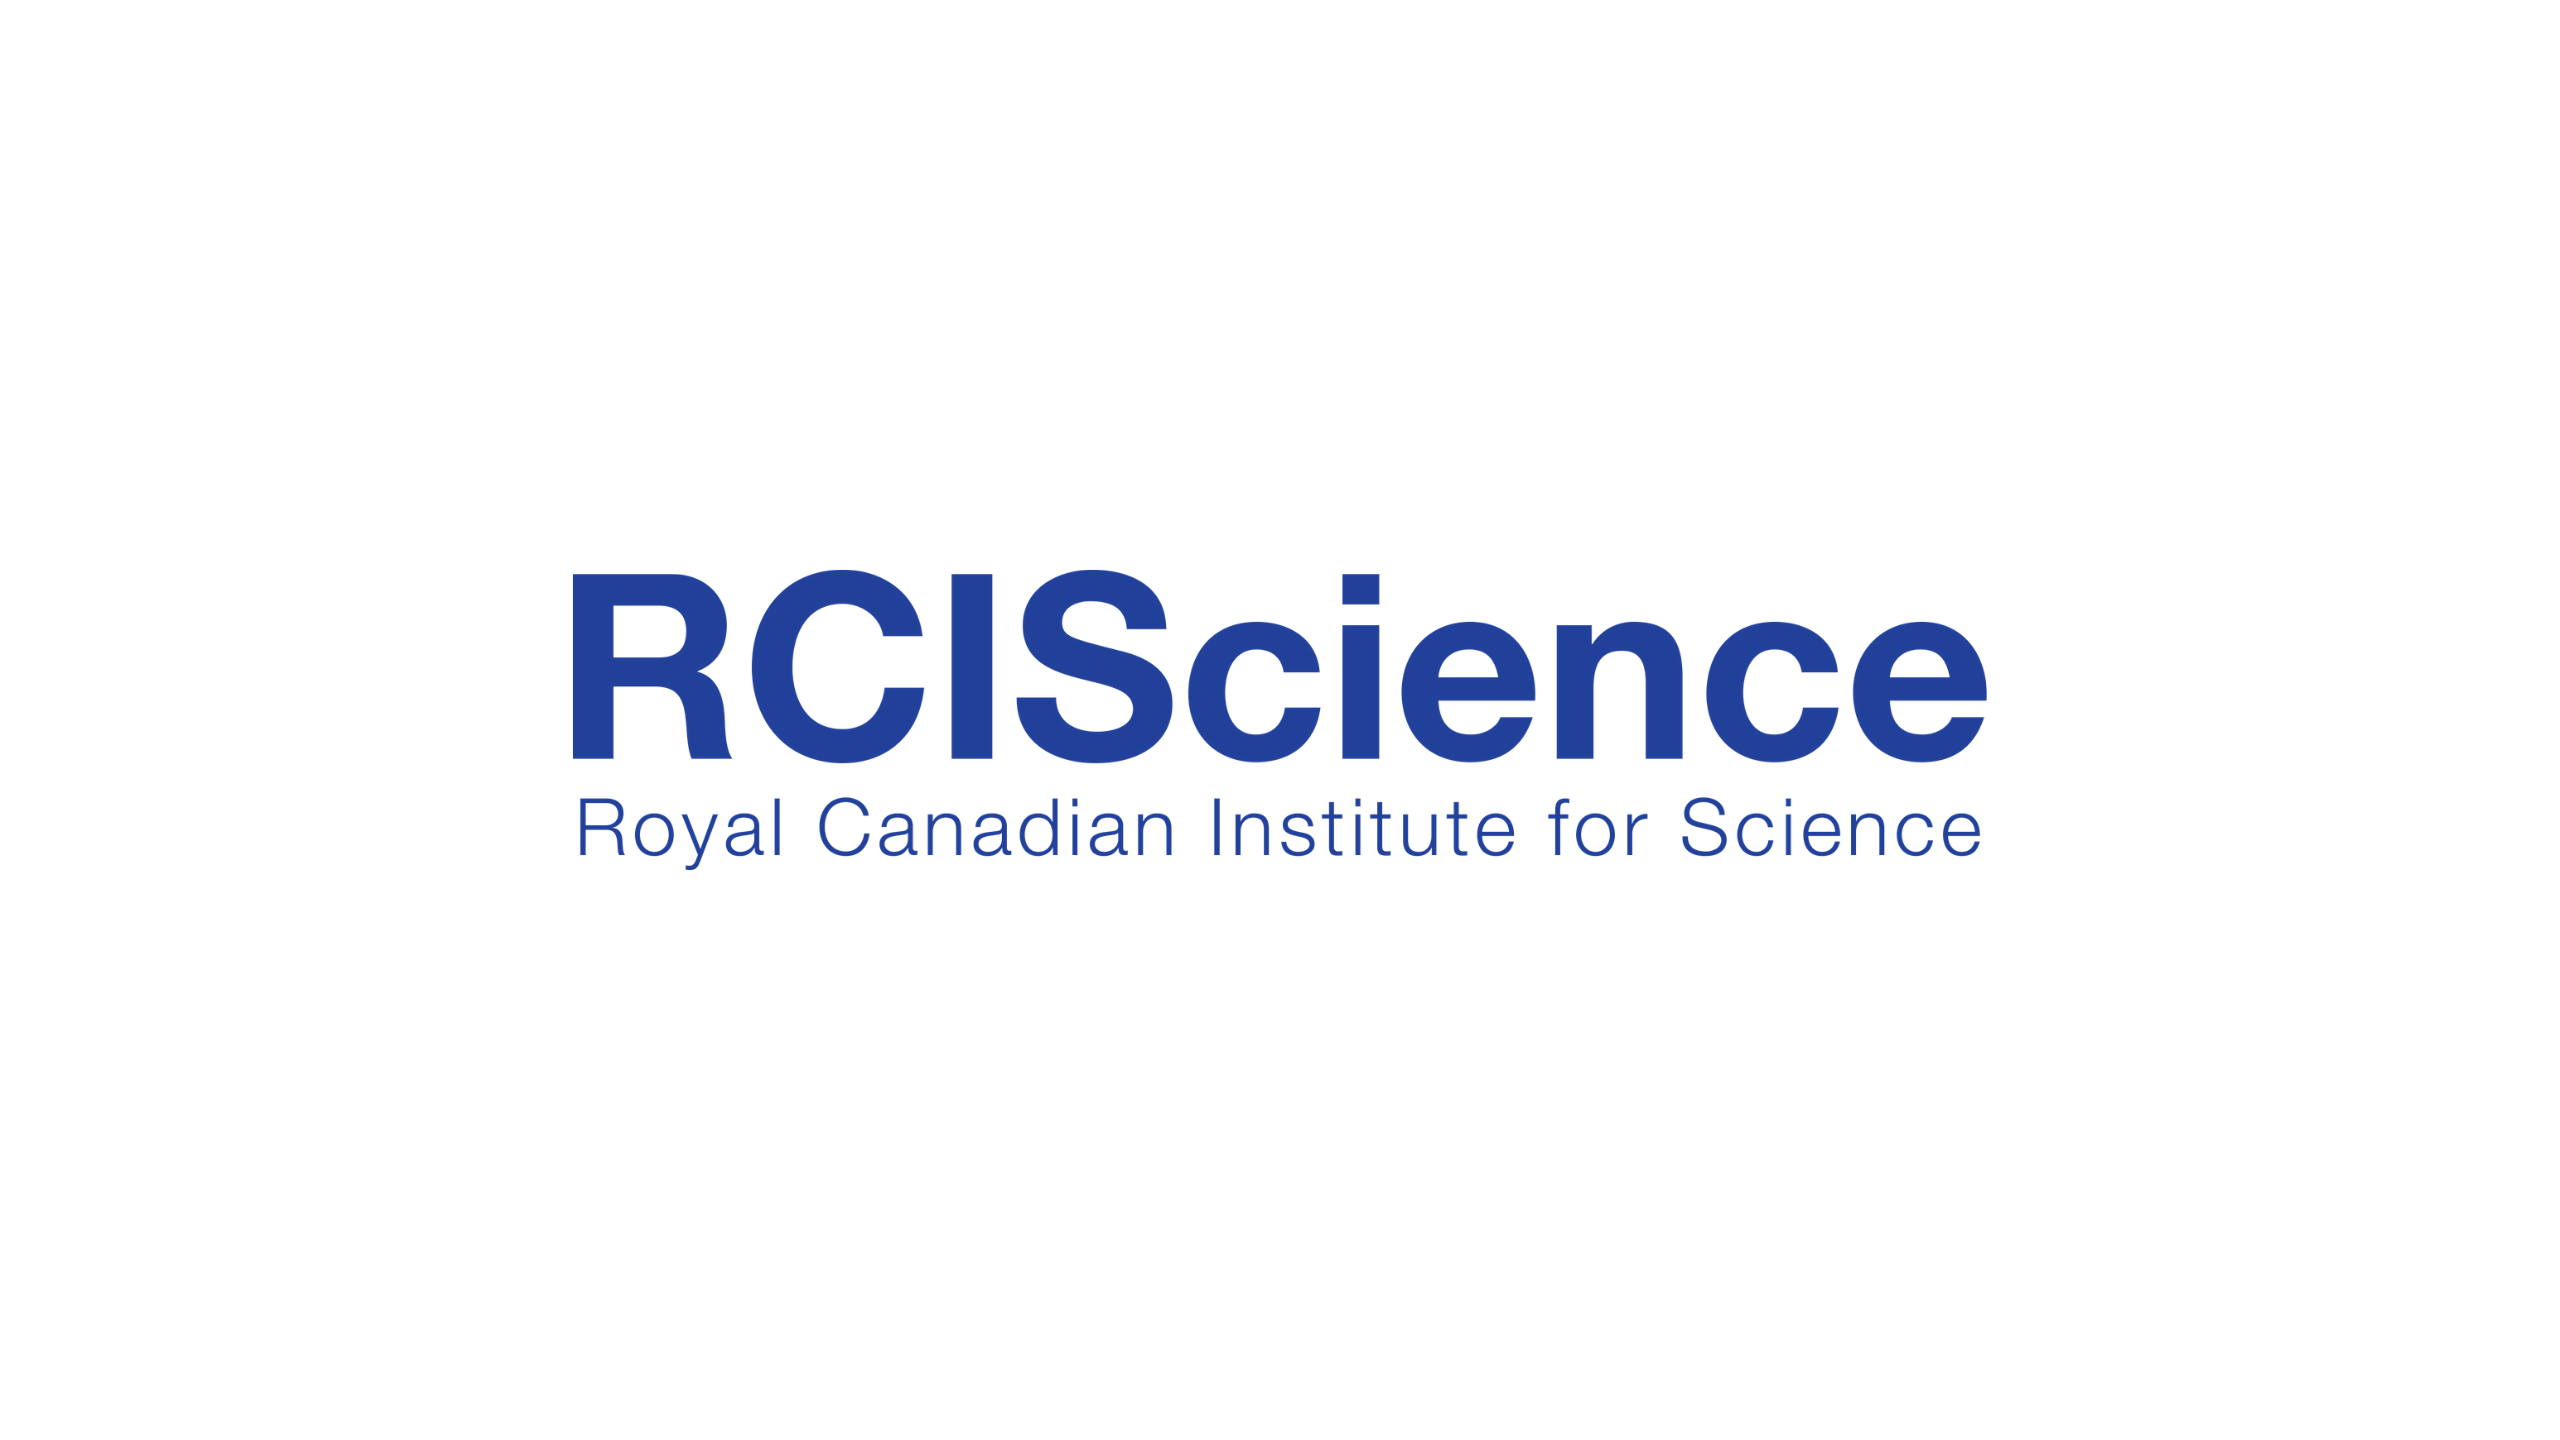 Royal Canadian Institute for Science (RCIScience) logo